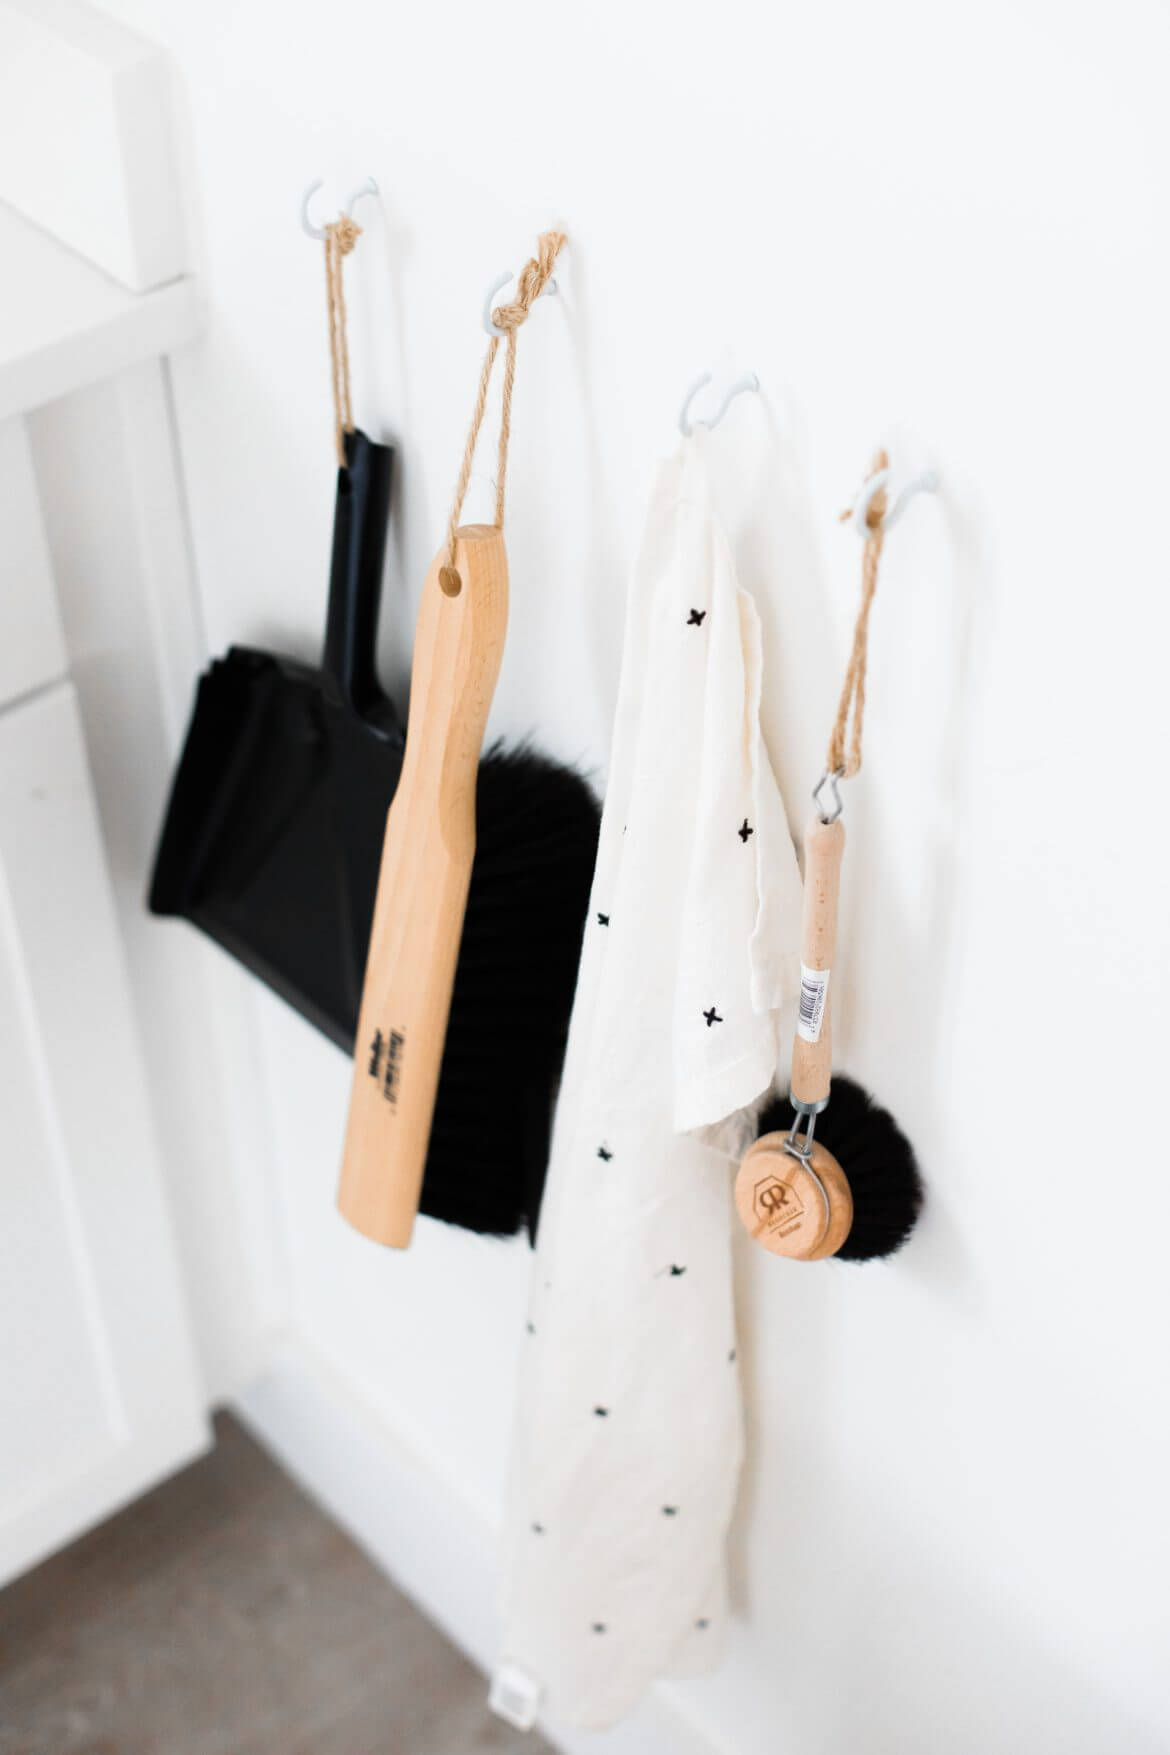 three coats hang on the wall with hooks